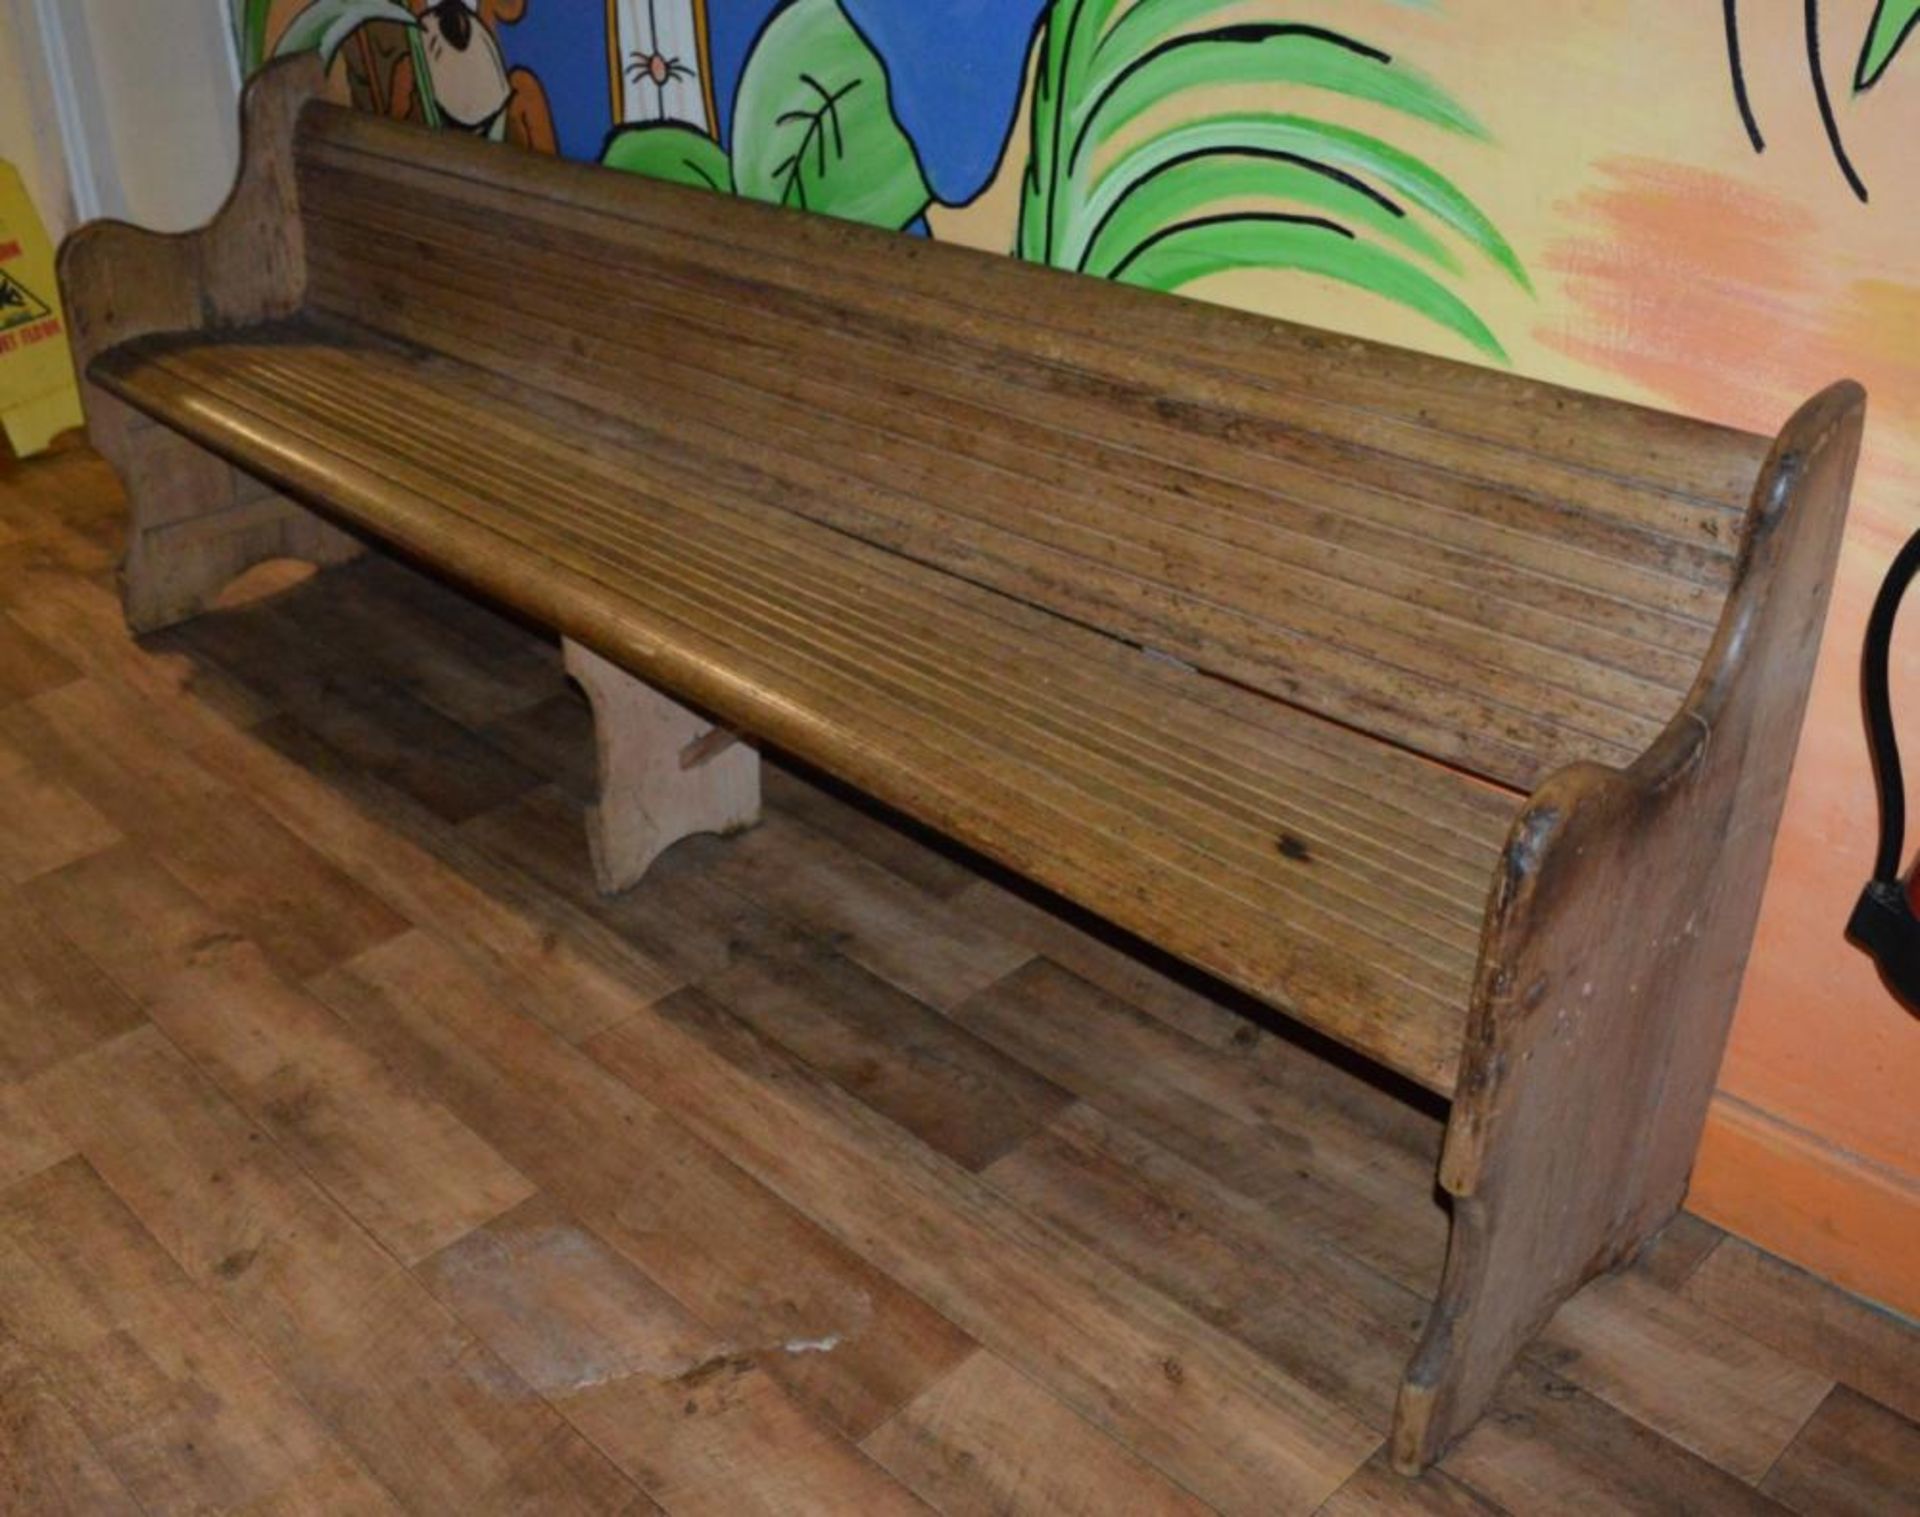 1 x Vintage Church Pew Seating Bench - Width 250 cms - Ref BB299 PTP - CL351 - Location: Chorley - Image 4 of 4